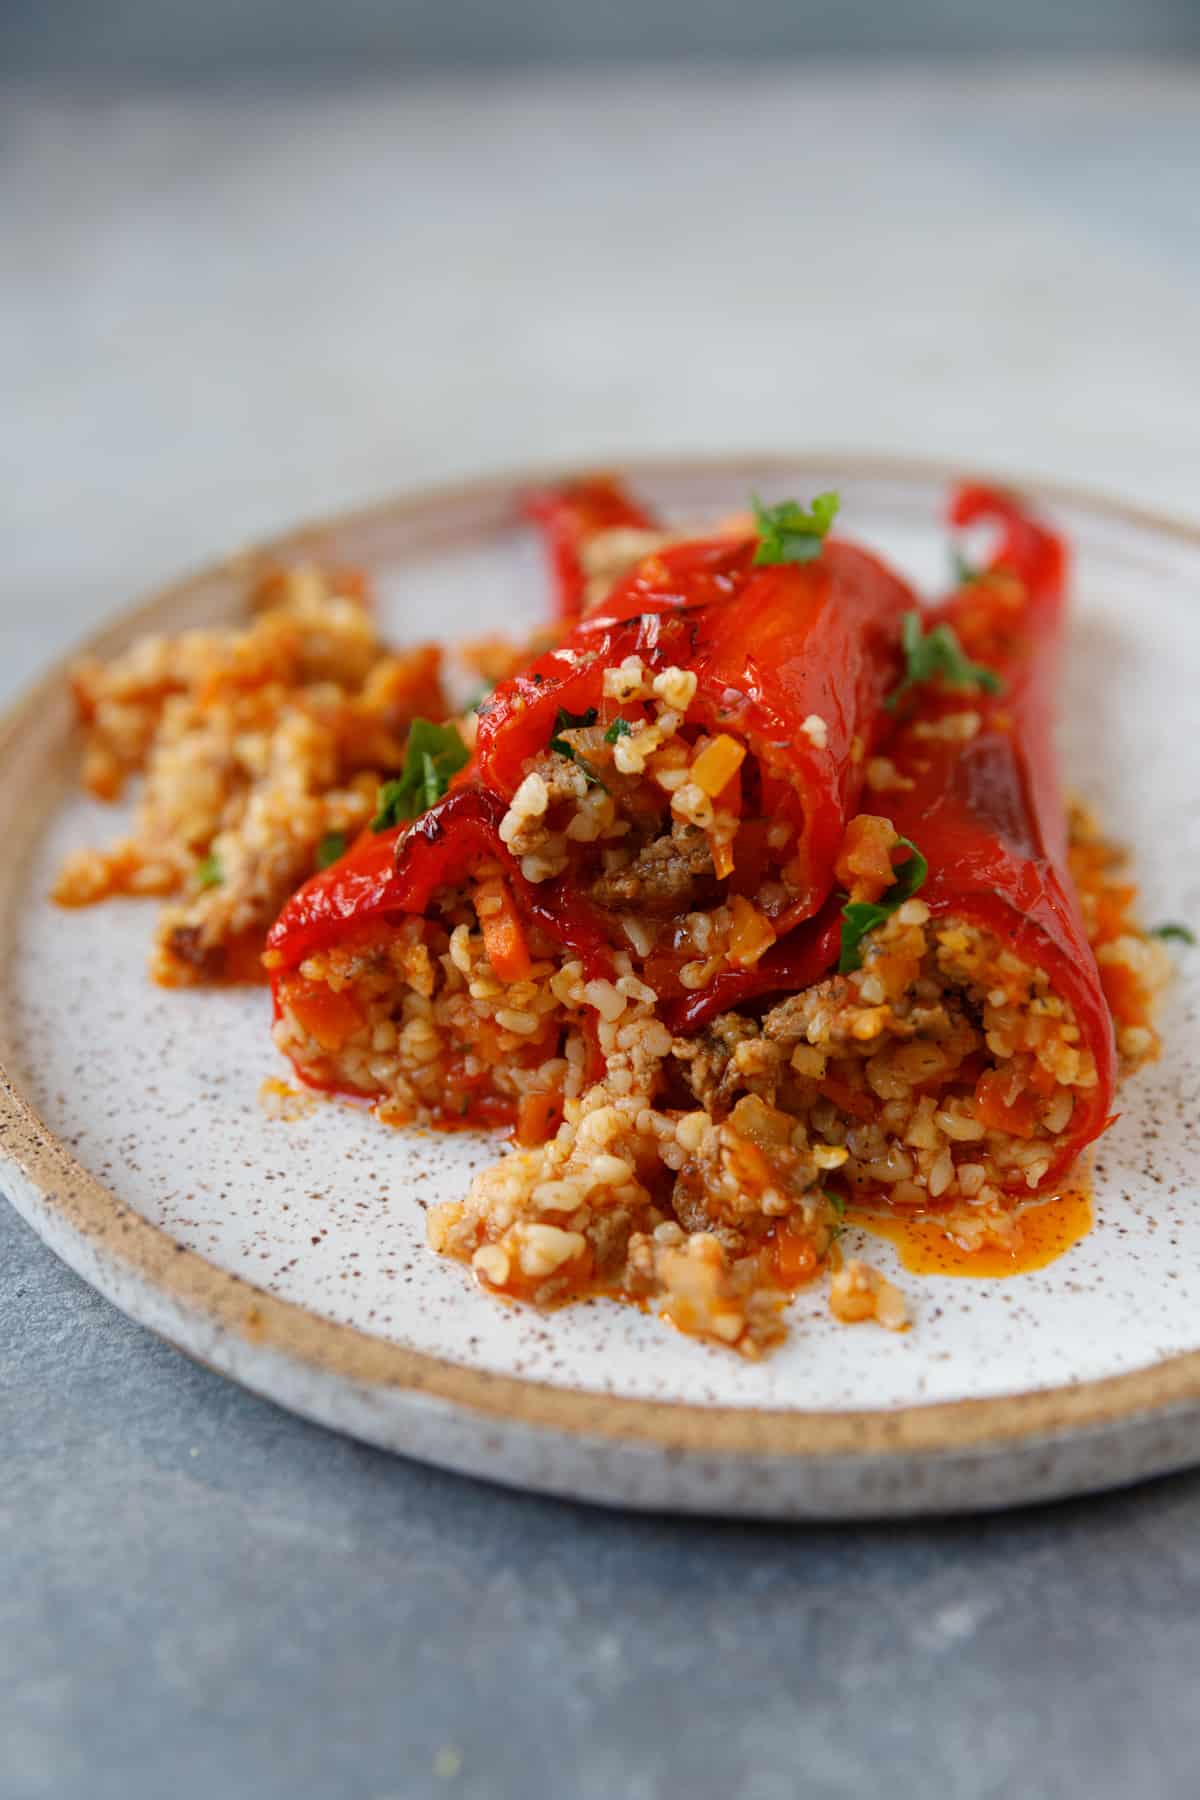 A plate with red peppers, stuffed with ground meat, veggies and bulhur